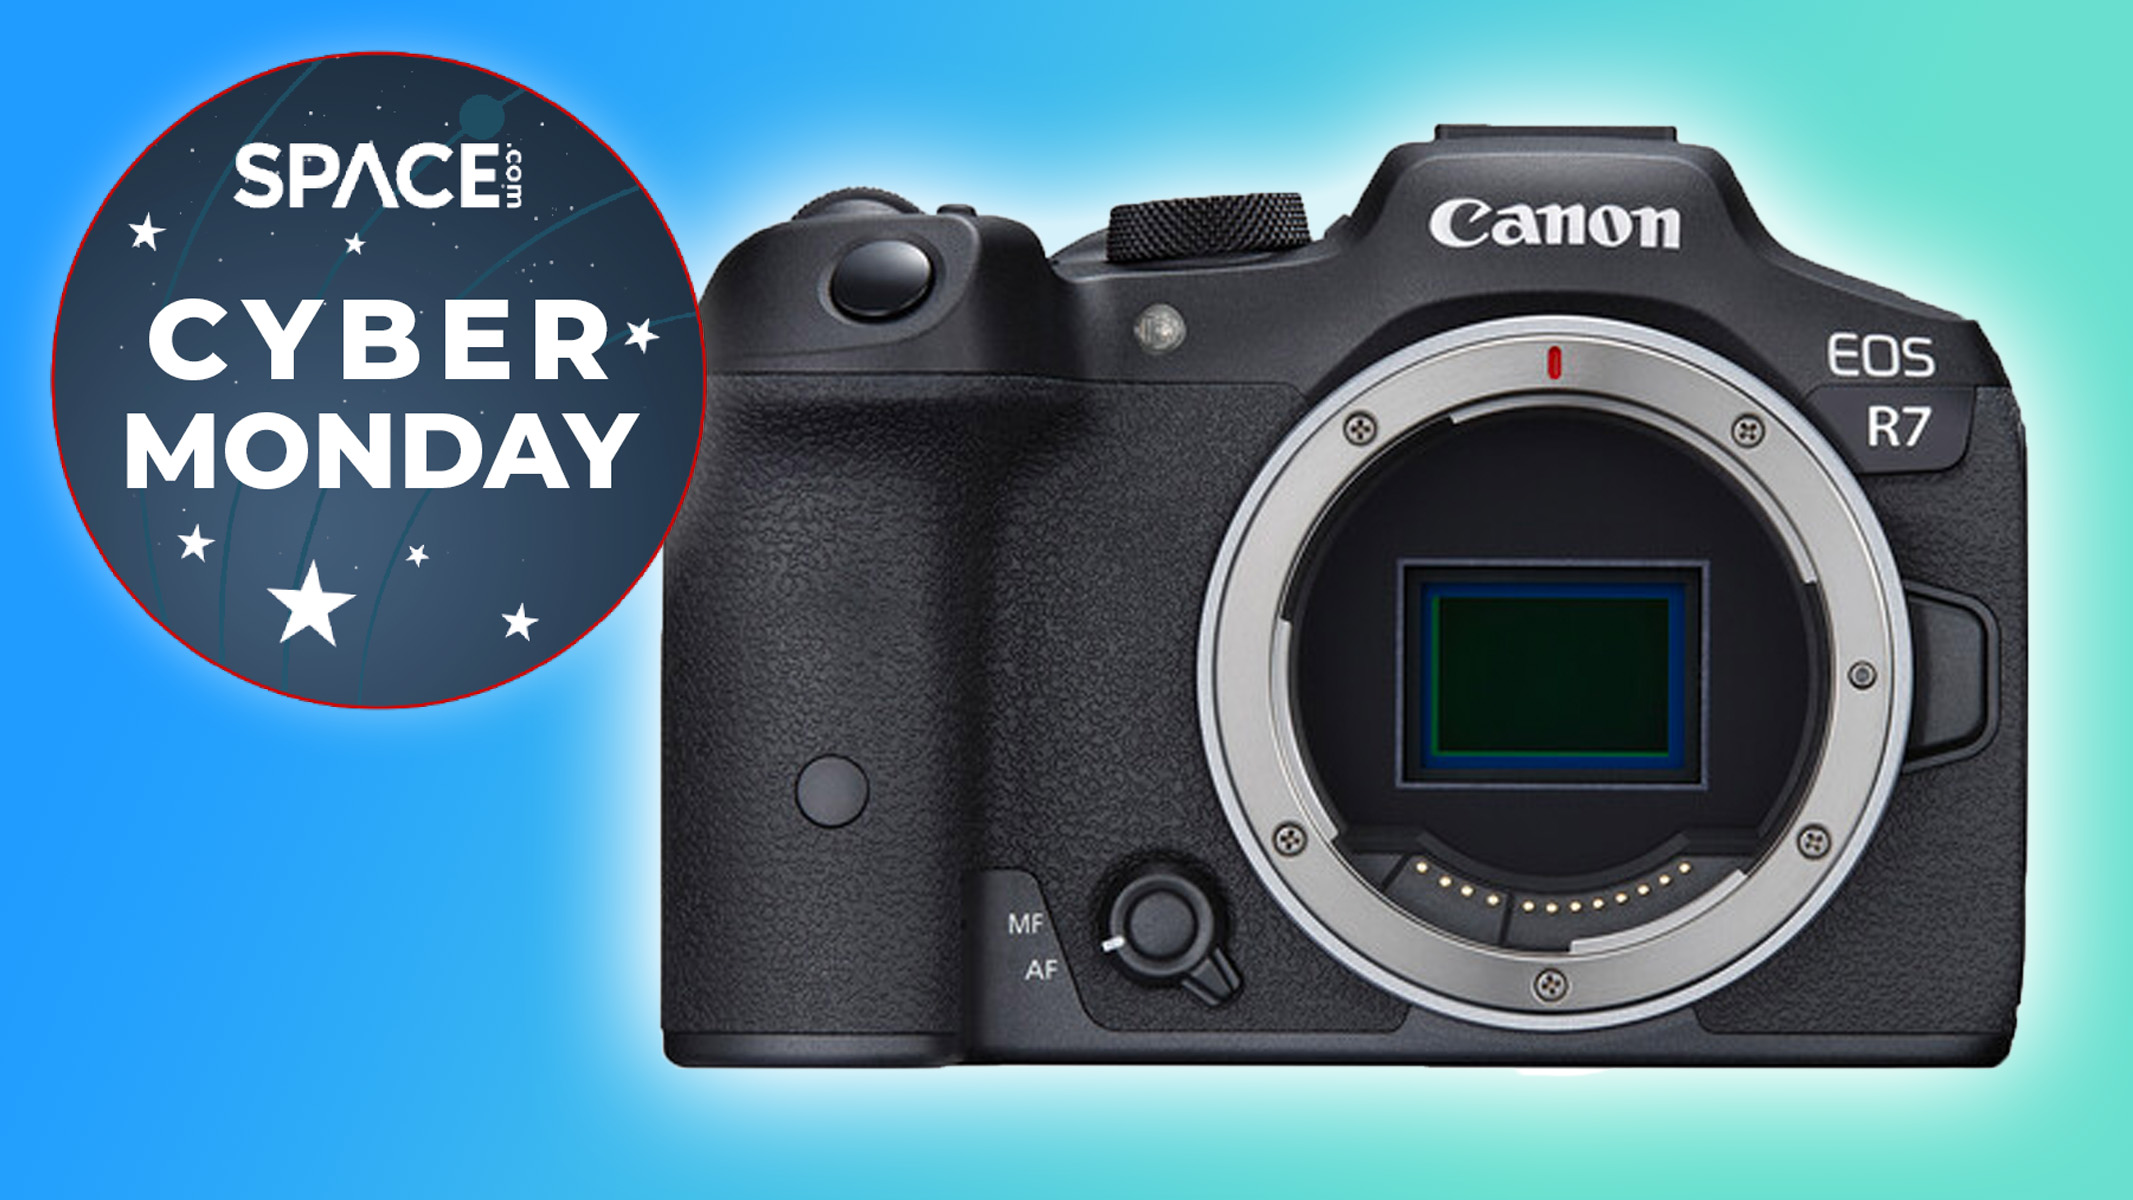 Cyber Monday: Save $100 with this Canon EOS R7 camera deal